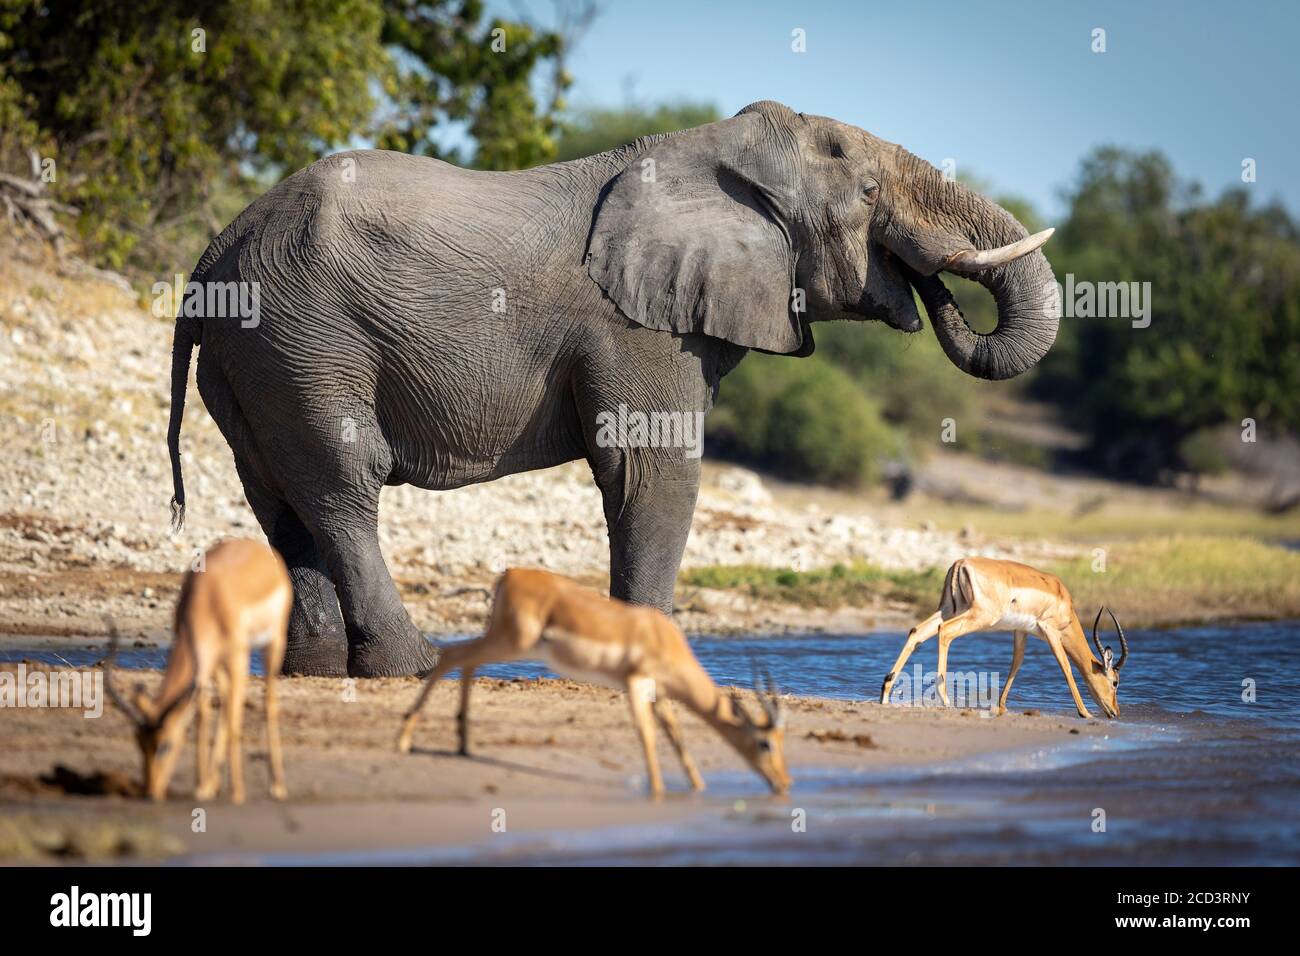 Thirsty elephant drinking water with three impala standing next to him in Chobe River in Botswana Stock Photo